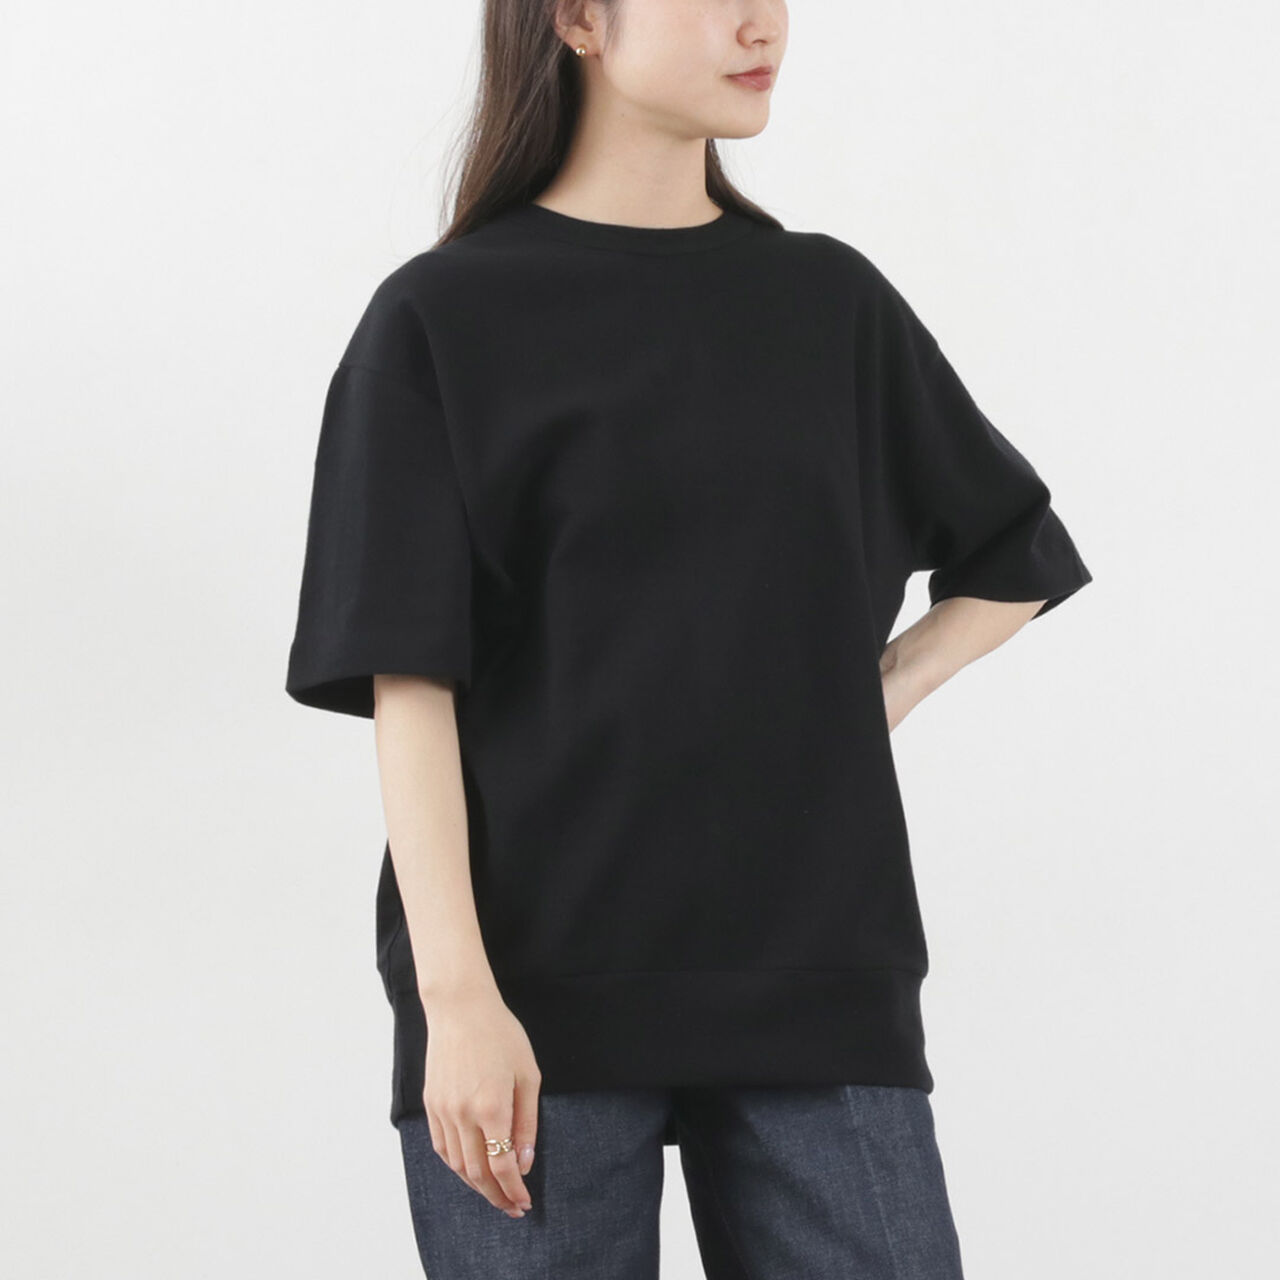 TONNNO Relaxed Fit Crew Neck T-Shirt,Nero, large image number 0